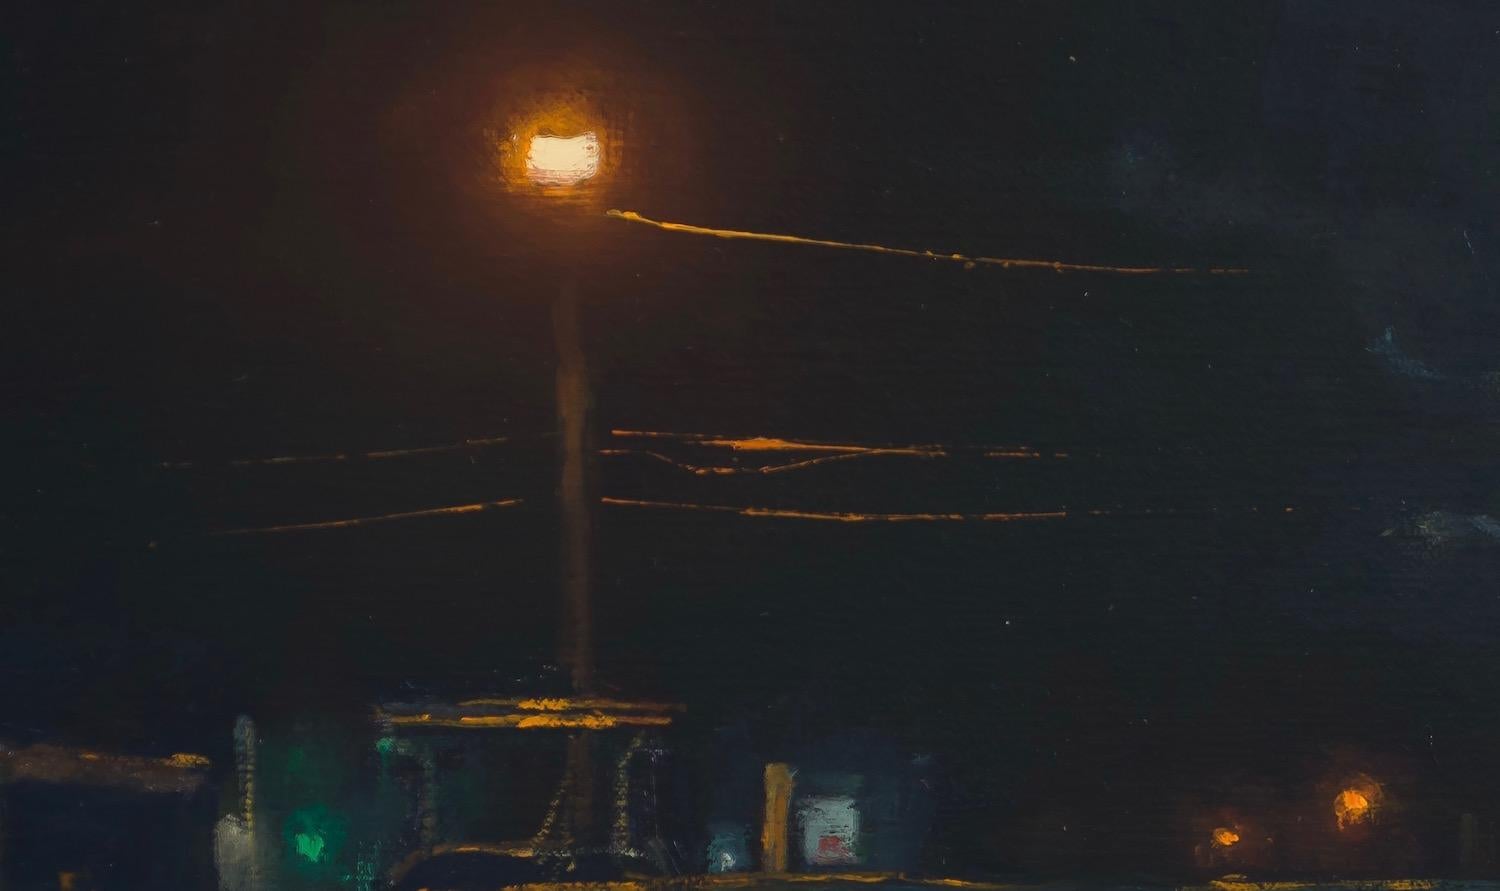 An oil painting of a boat yard at nighttime. Boats at rest behind a locked chain-link fence. Street lights glow with hot orange auras. The full moon peeks out glowing a cool bright white light, reflecting indigo clouds. Shadows cast create an